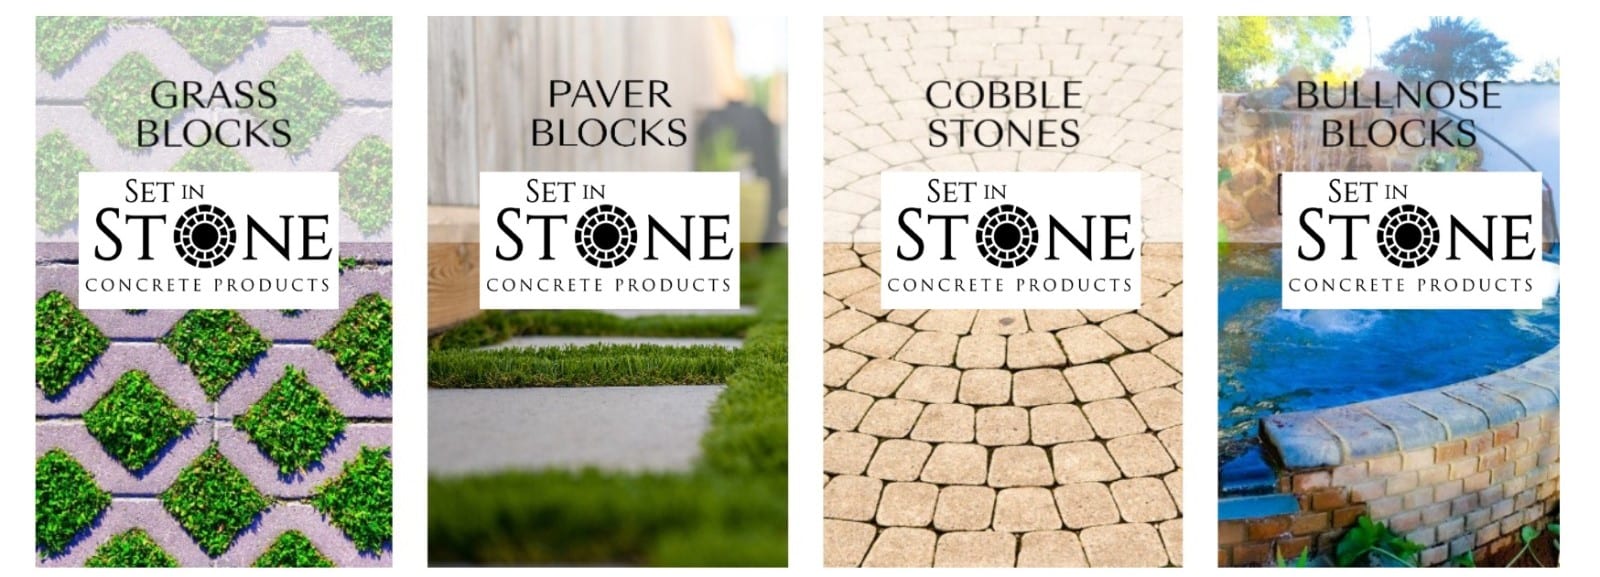 Set in Stone Concrete Products 7